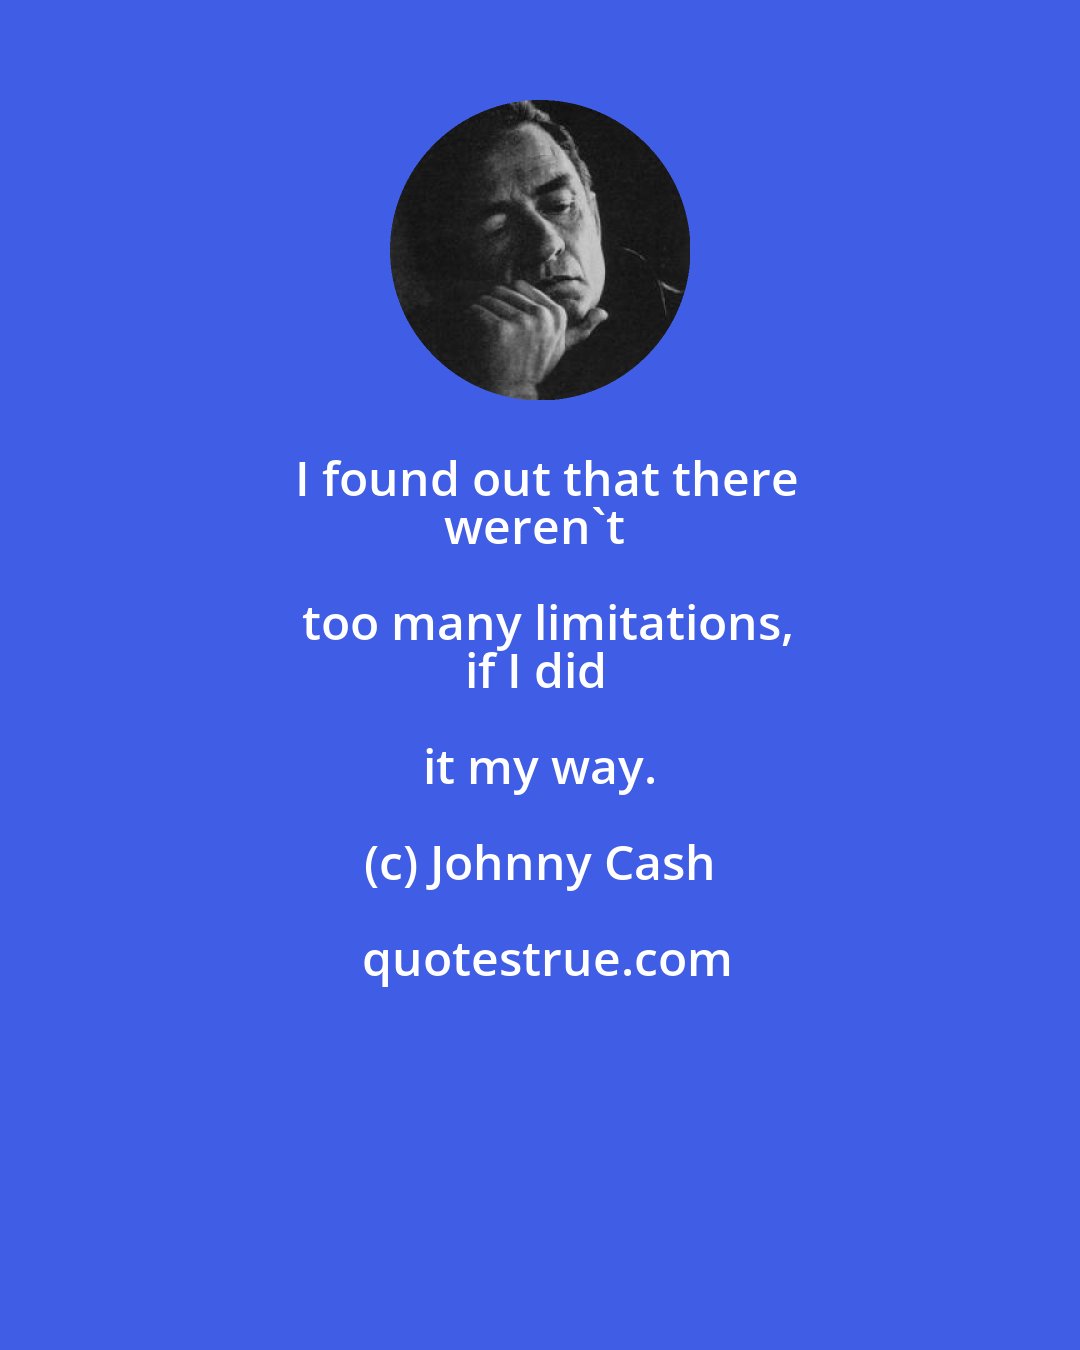 Johnny Cash: I found out that there
weren't too many limitations,
if I did it my way.